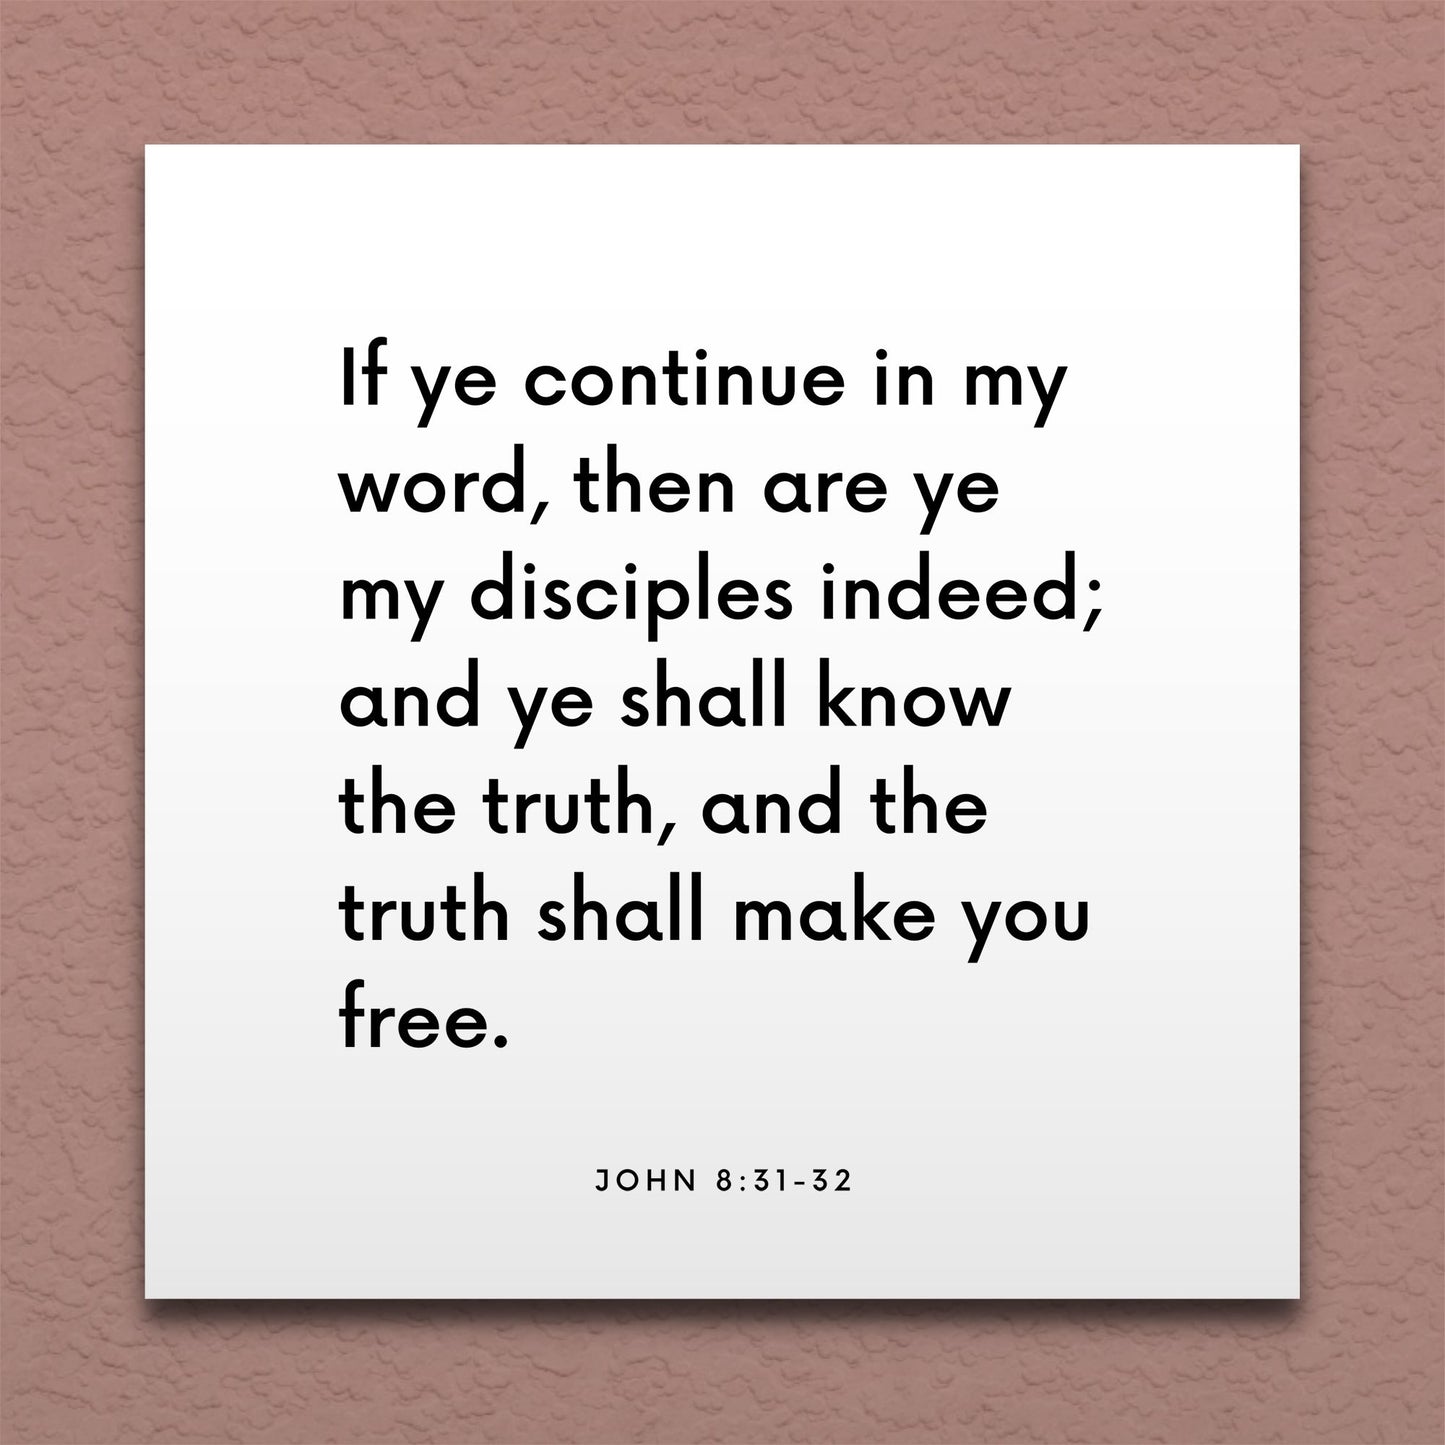 Wall-mounted scripture tile for John 8:31-32 - "Ye shall know the truth, and the truth shall make you free"